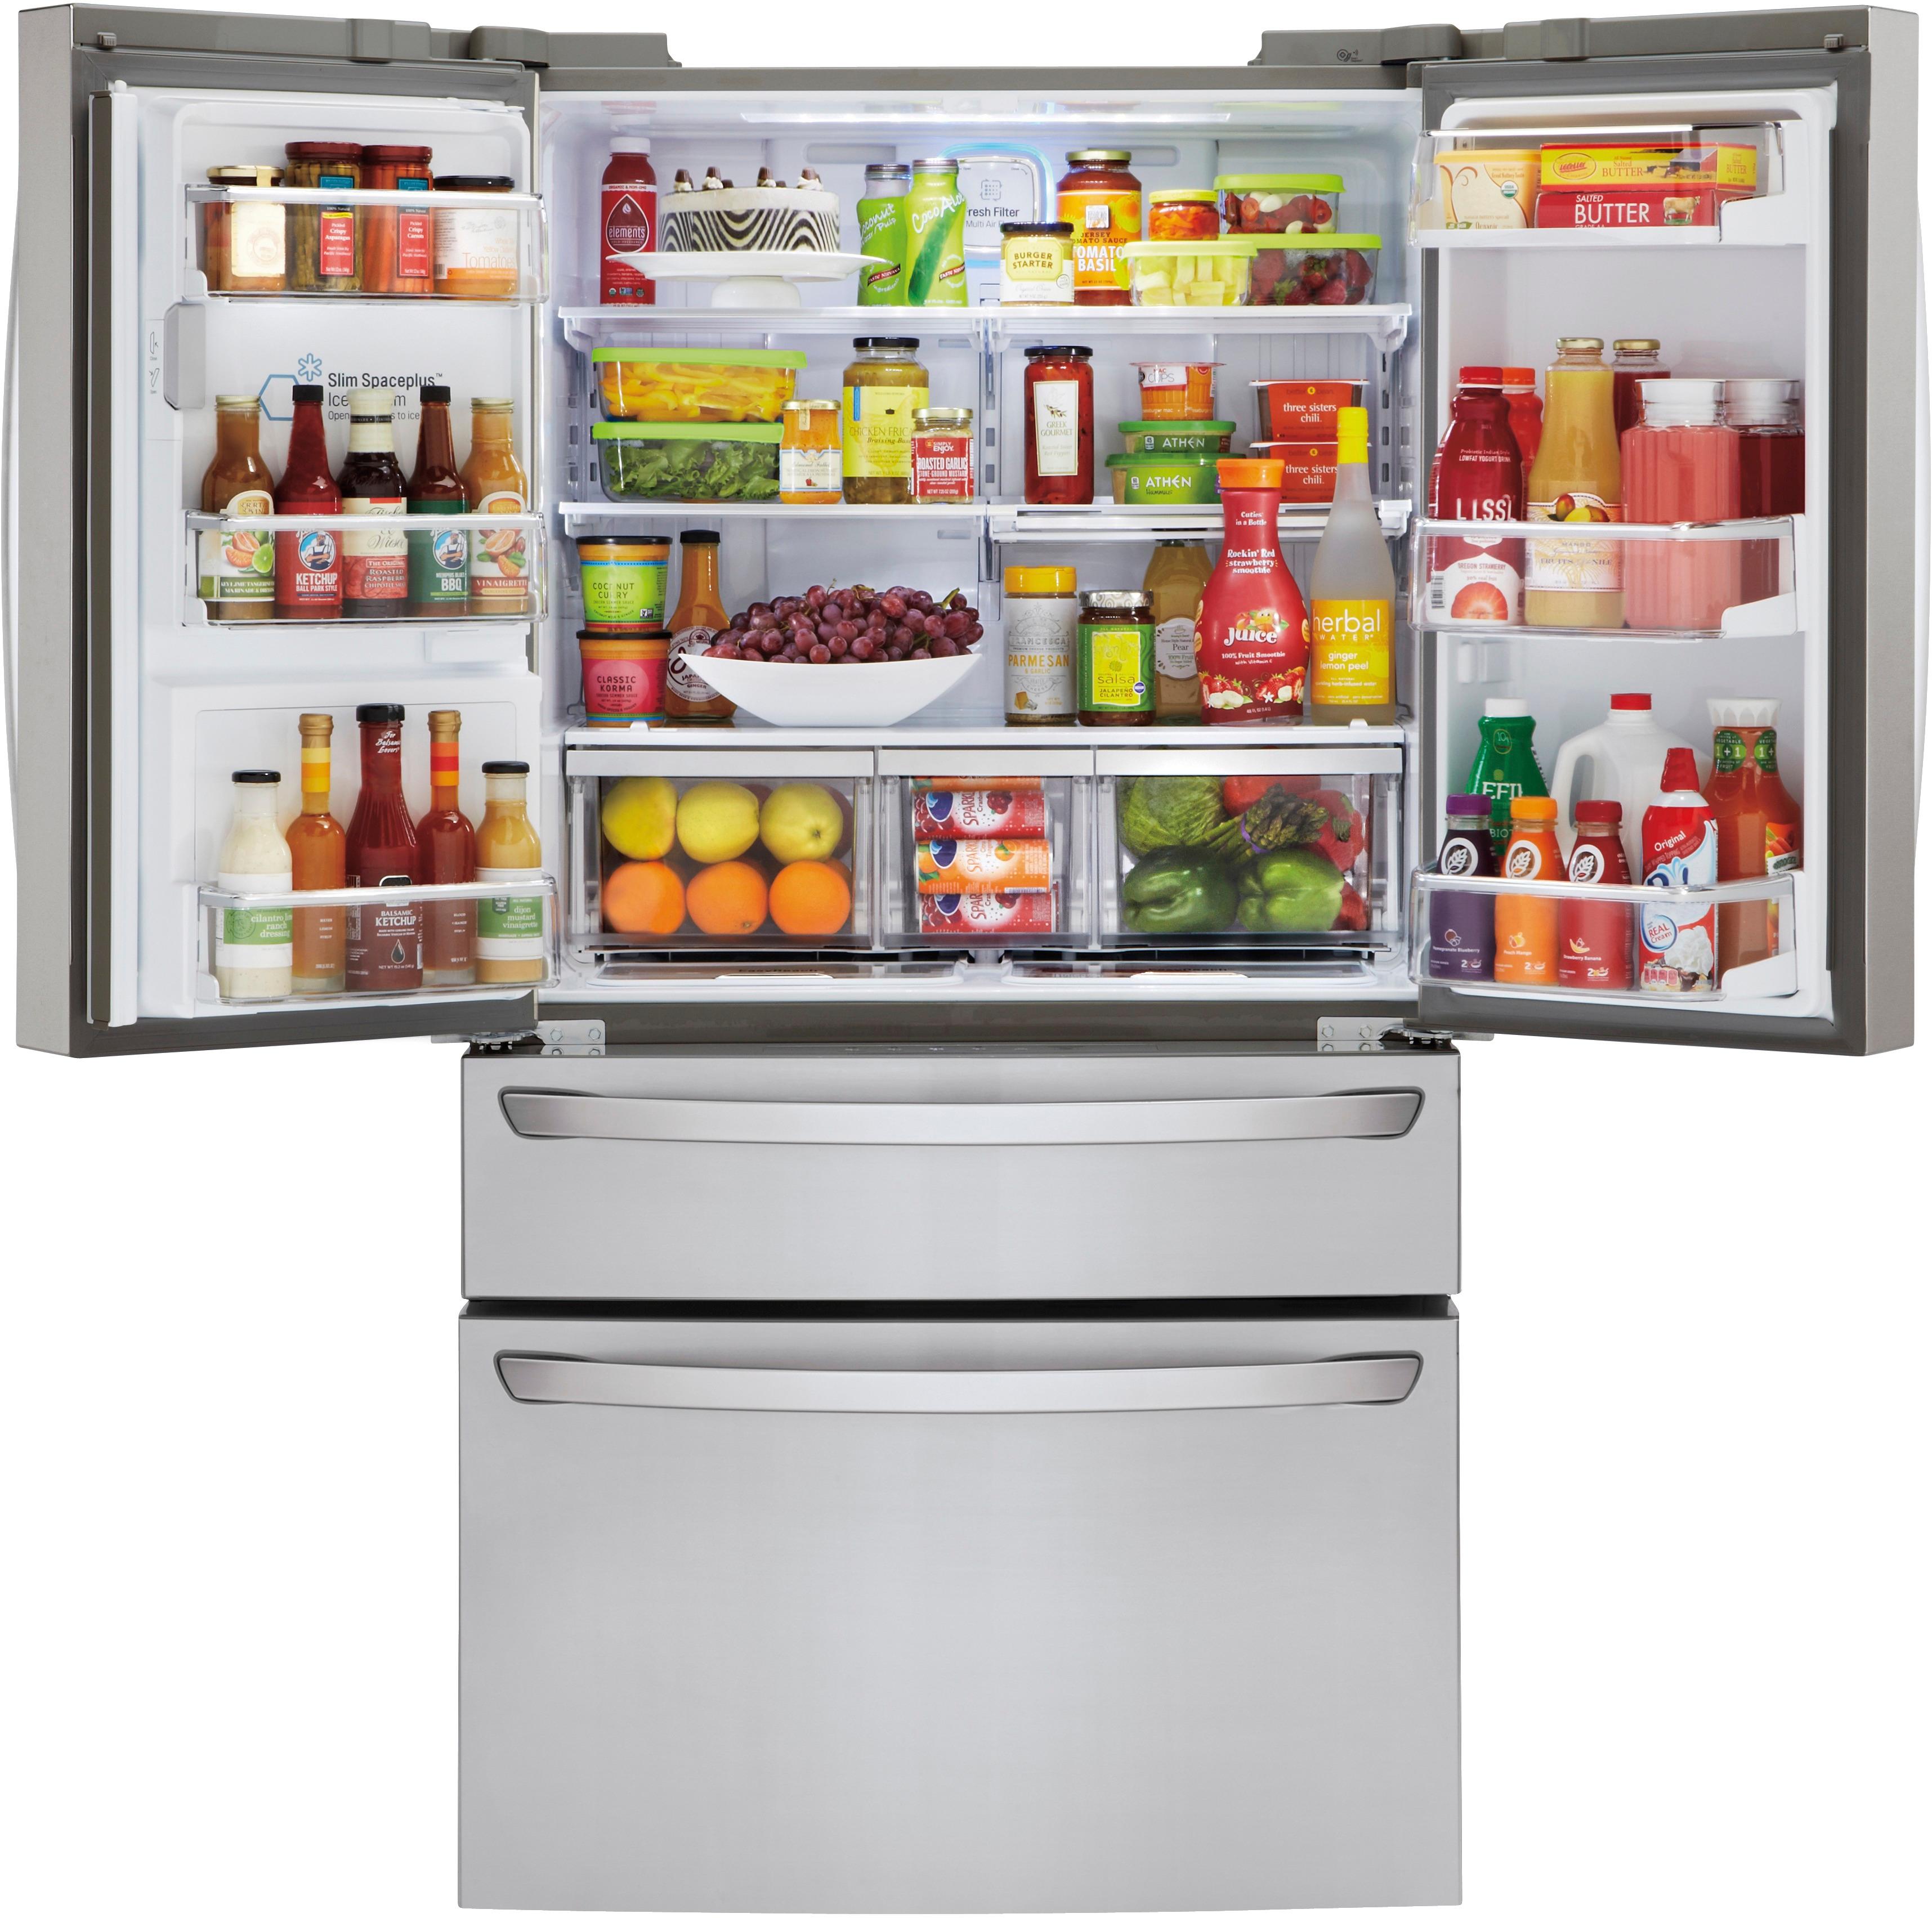 LG 36 French Door Refrigerator With Internal Water Dispenser Stainless